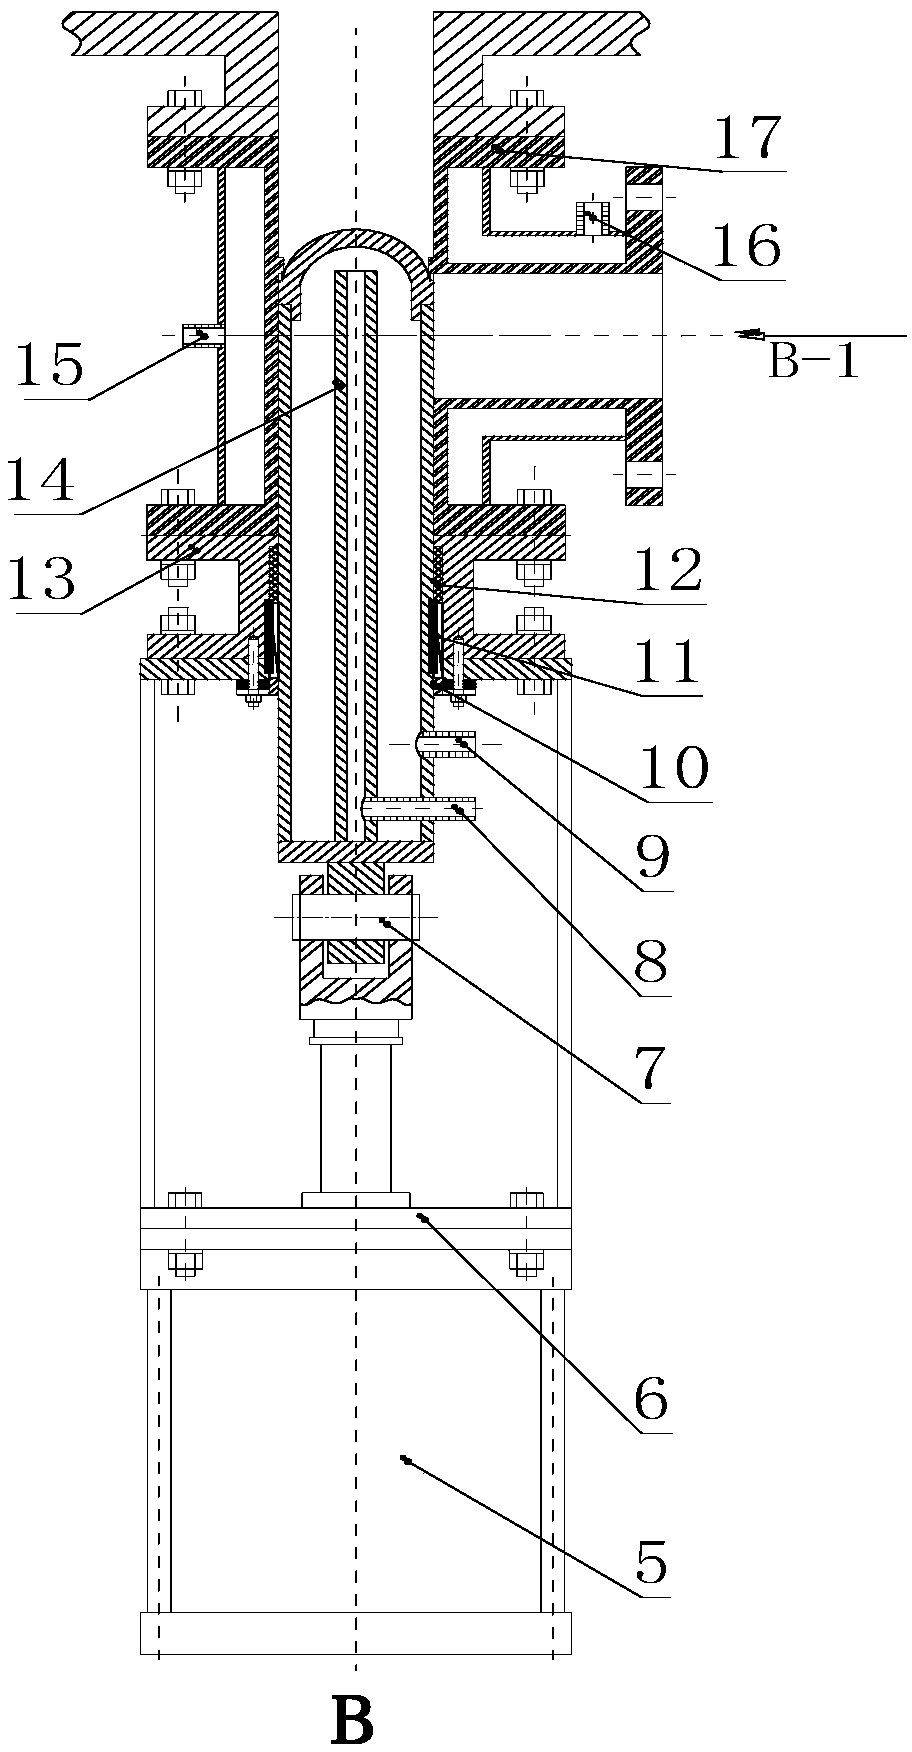 Protection system of high-temperature and high-pressure valve